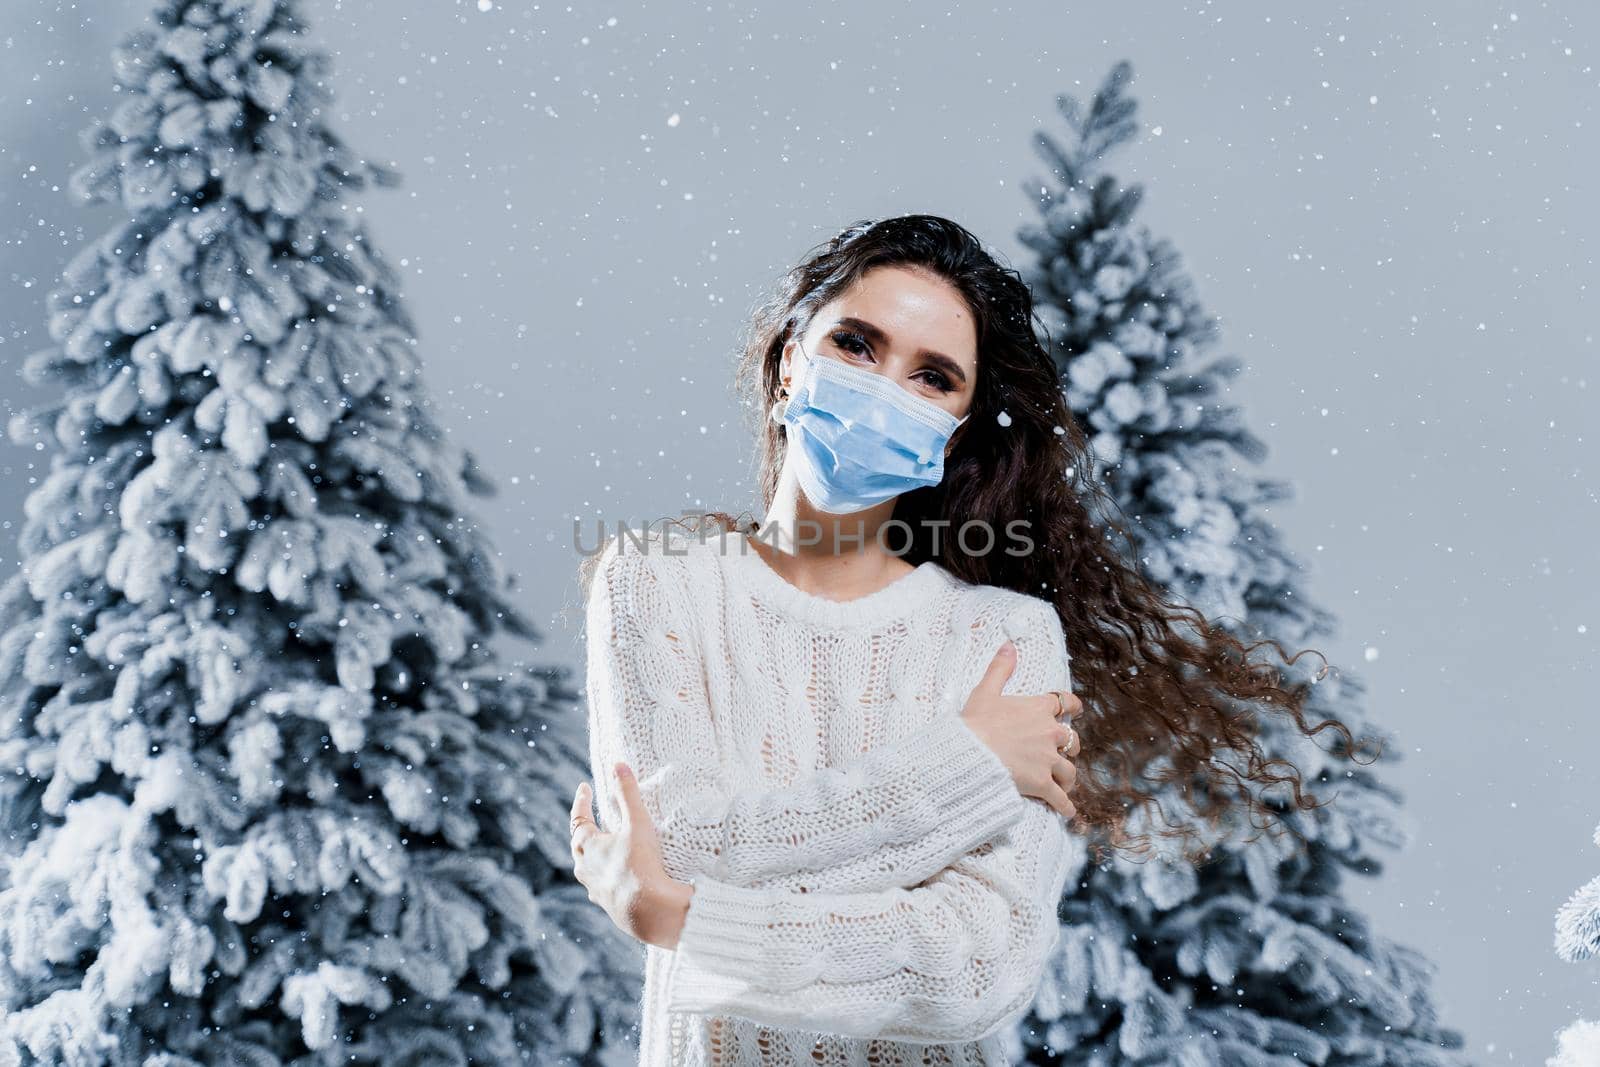 New year celebration at covid-19 coronavirus quarantine period. Happy girl in medical mask with falling snow stays at home. Social distance. Winter holidays in snowy day